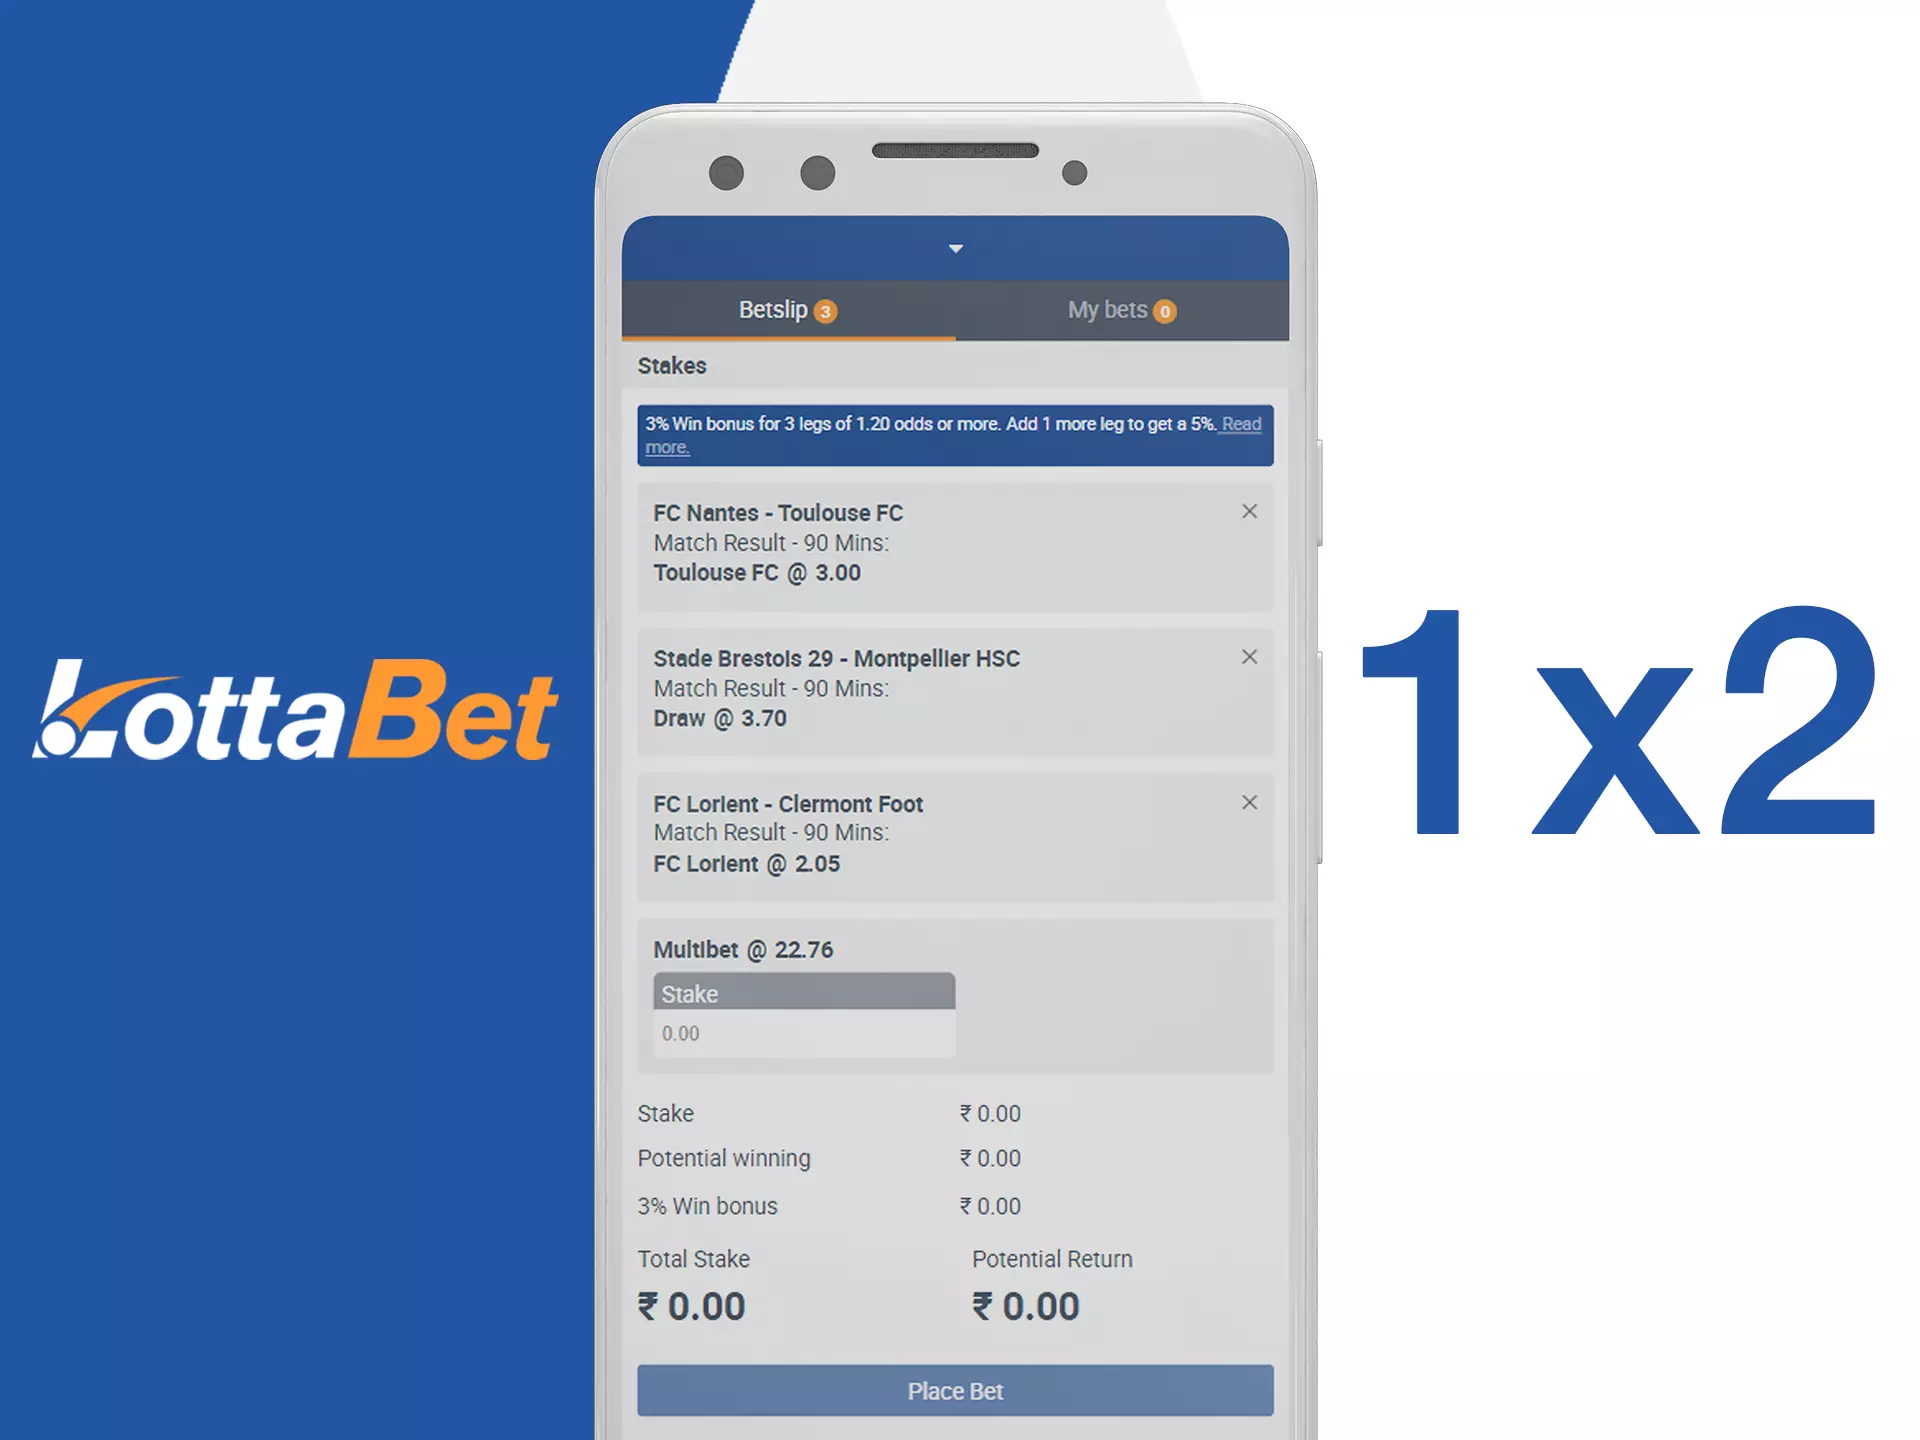 Bet on different situations in LottaBet app.